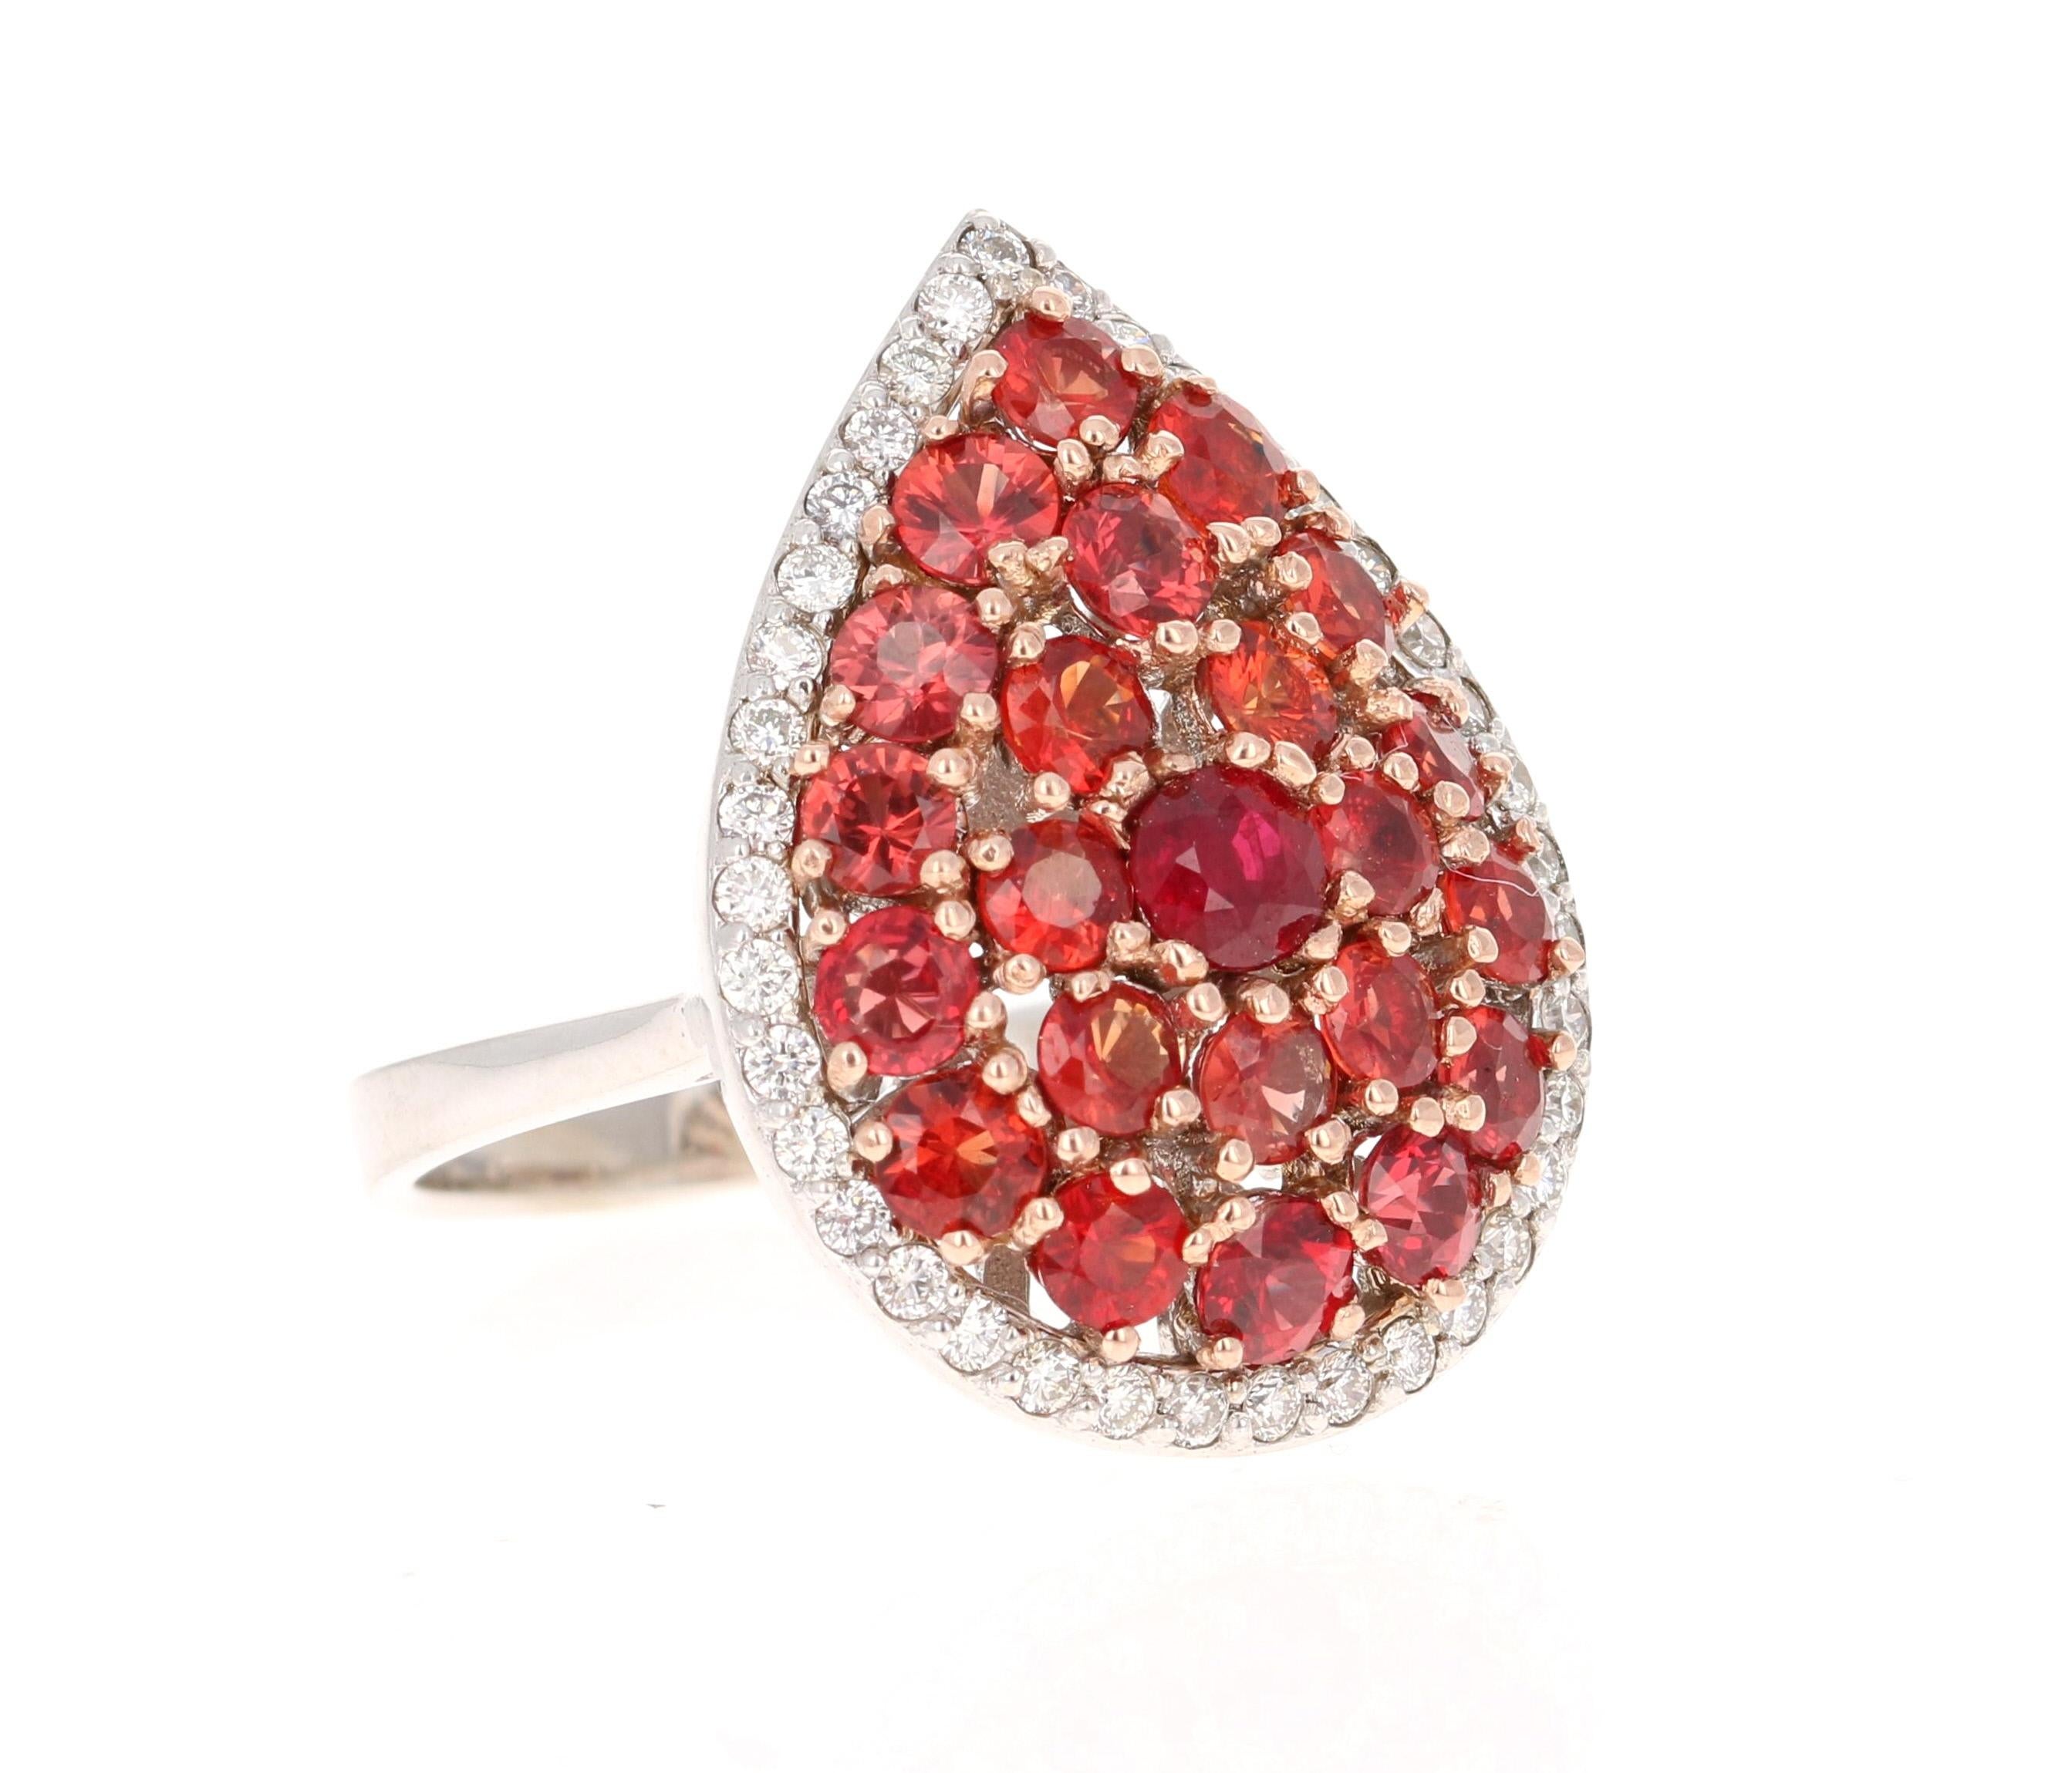 This beautiful ring has Round Cut Natural Red Sapphires that weigh 3.27 Carats. It has a beautiful halo of 38 Round Cut Natural Diamonds that weigh 0.35 Carats. (Clarity: VS, Color: H) 

Curated in 14 Karat White Gold and weighs approximately 8.0